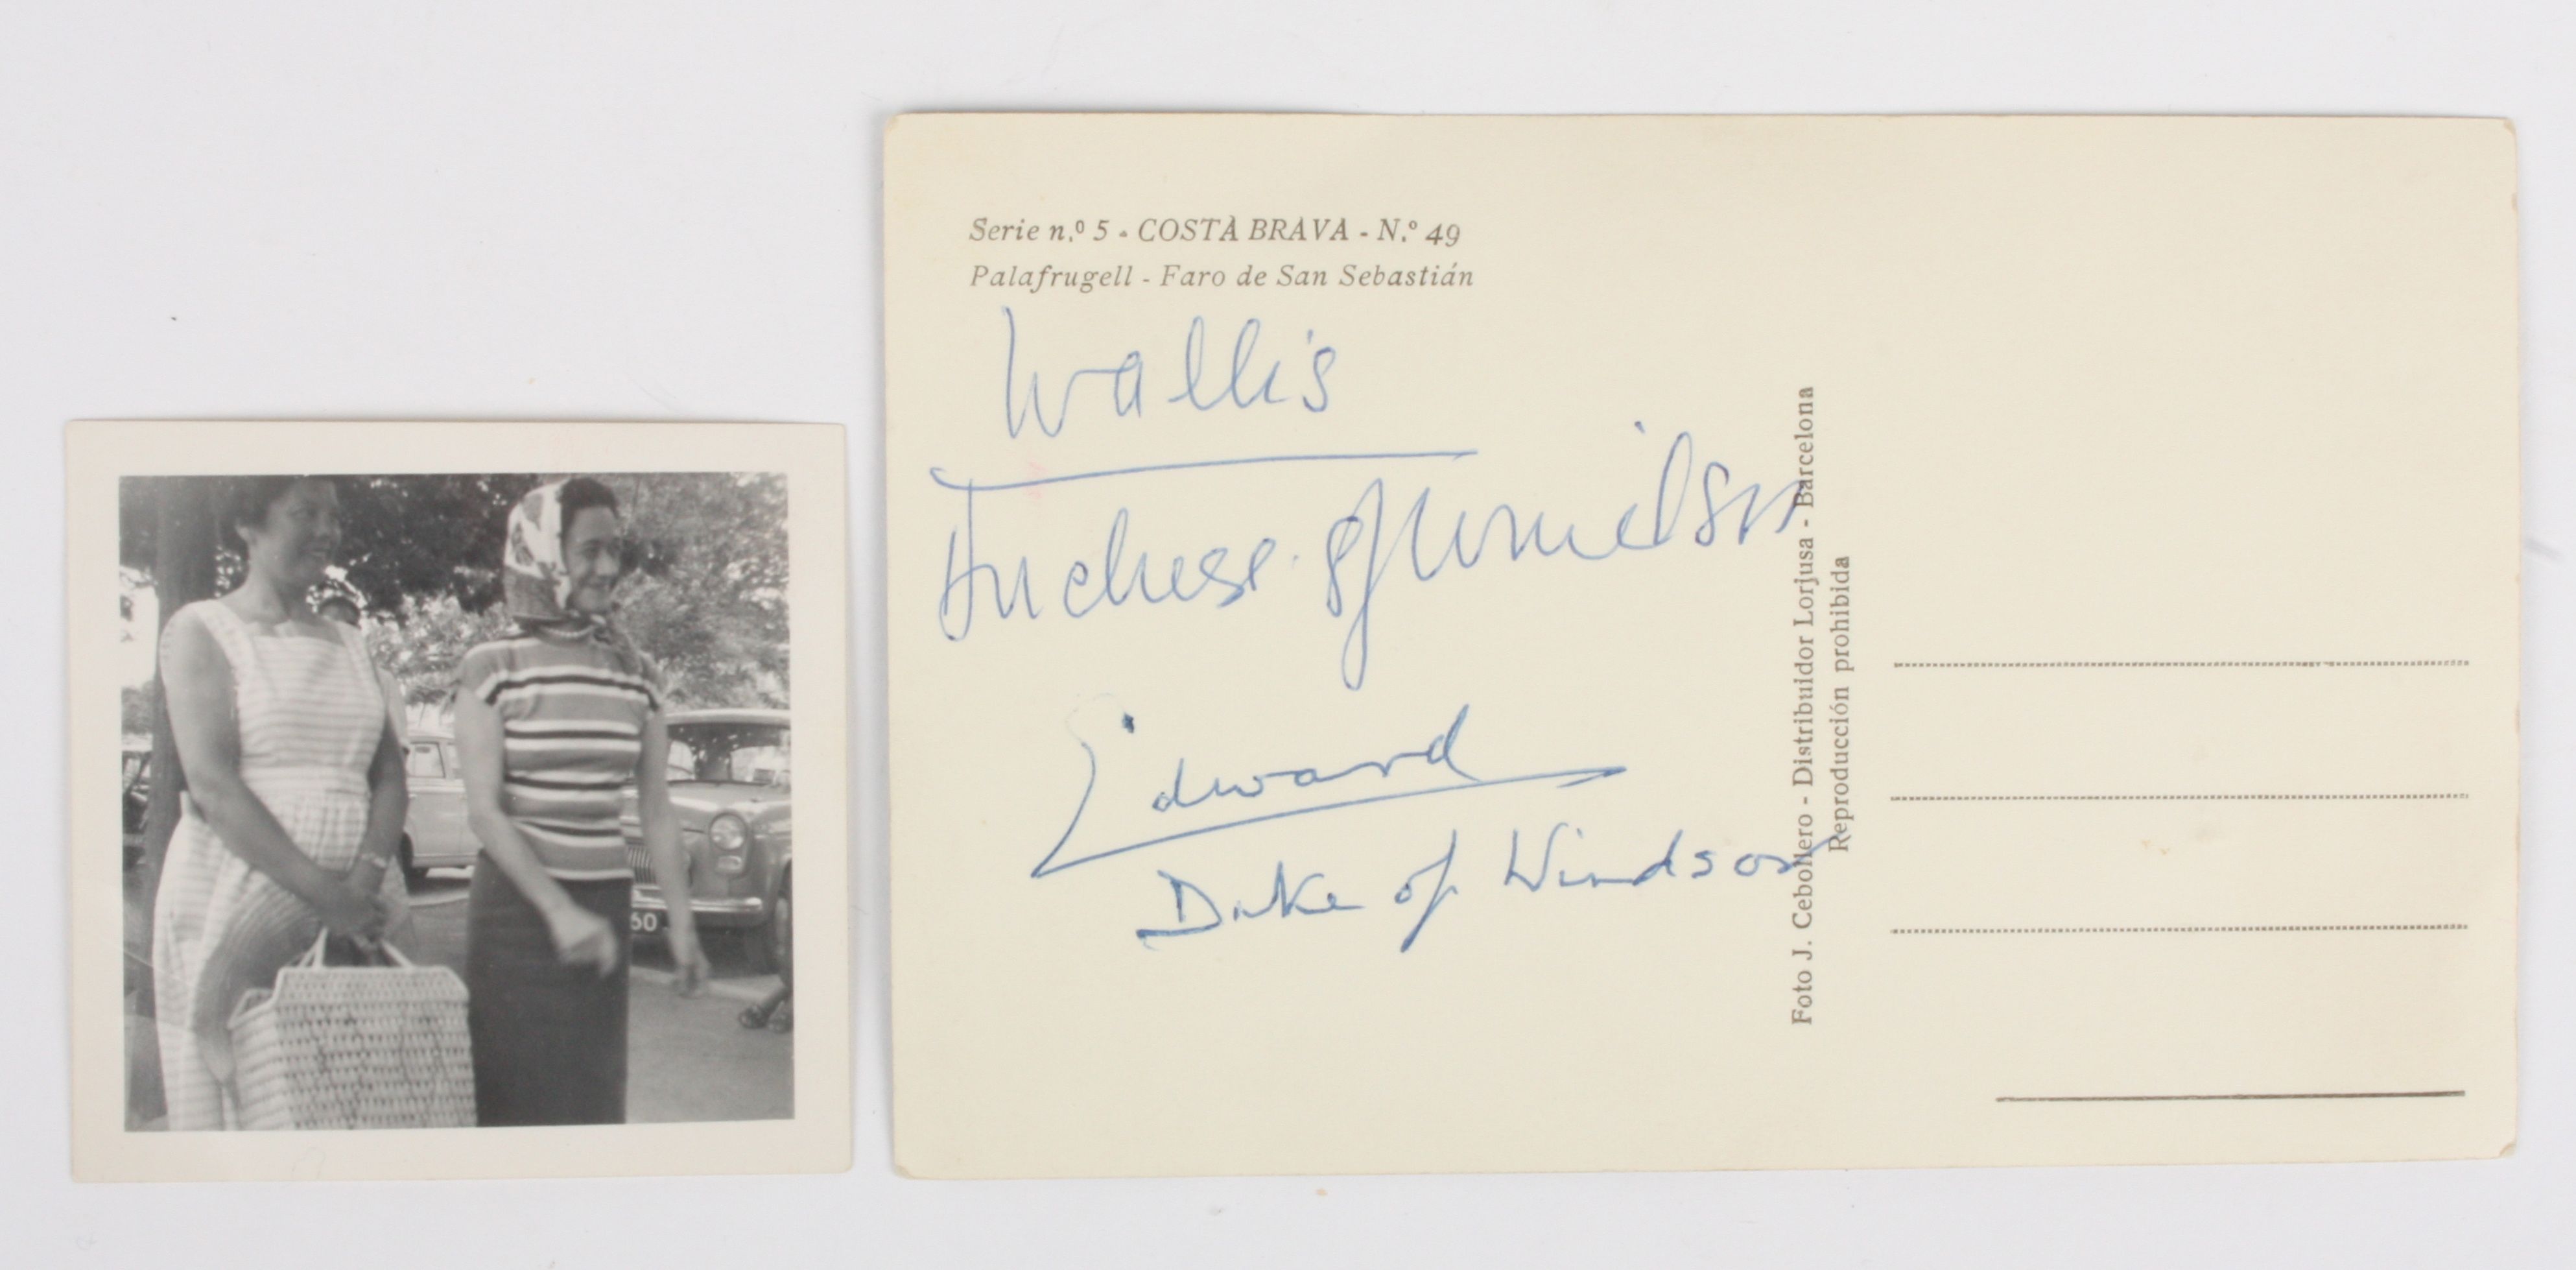 A postcard signed by Wallis Simpson and Edward VII
signed 'Wallis Duchess of Windsor' and 'Edward